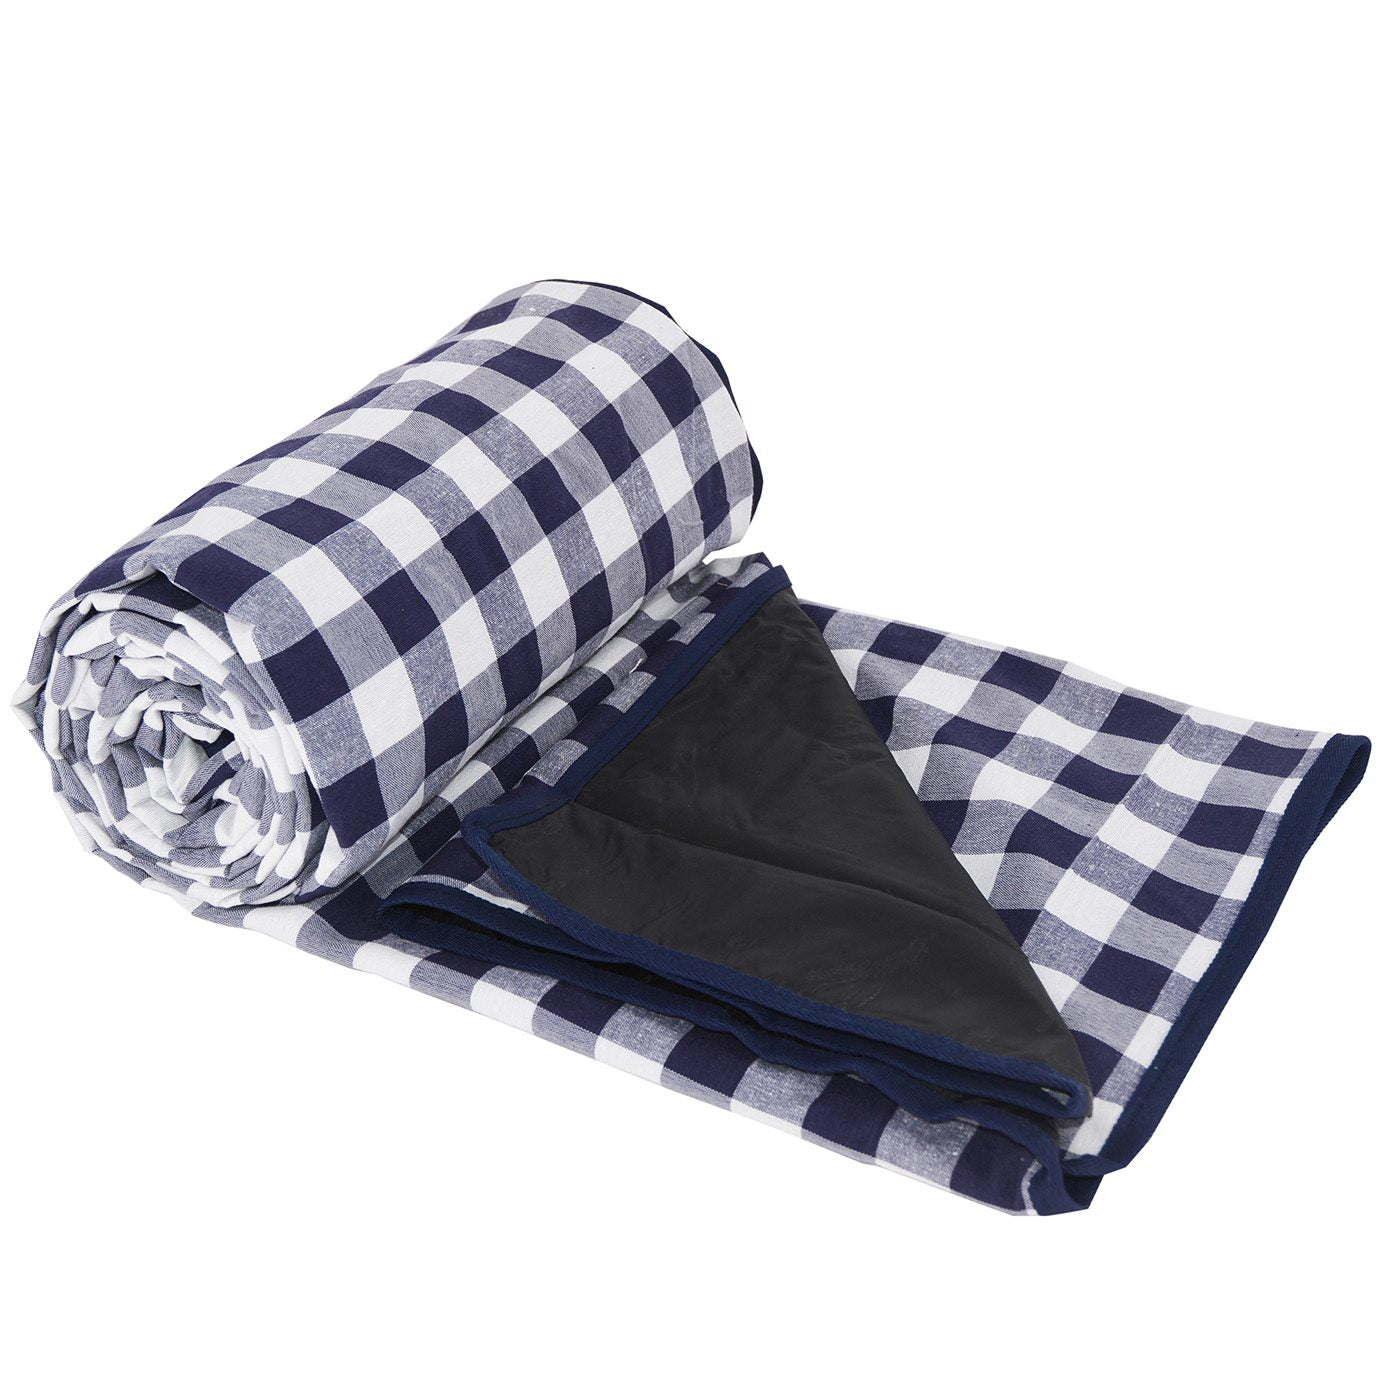 Waterproof picnic blanket white and blue tiles XL